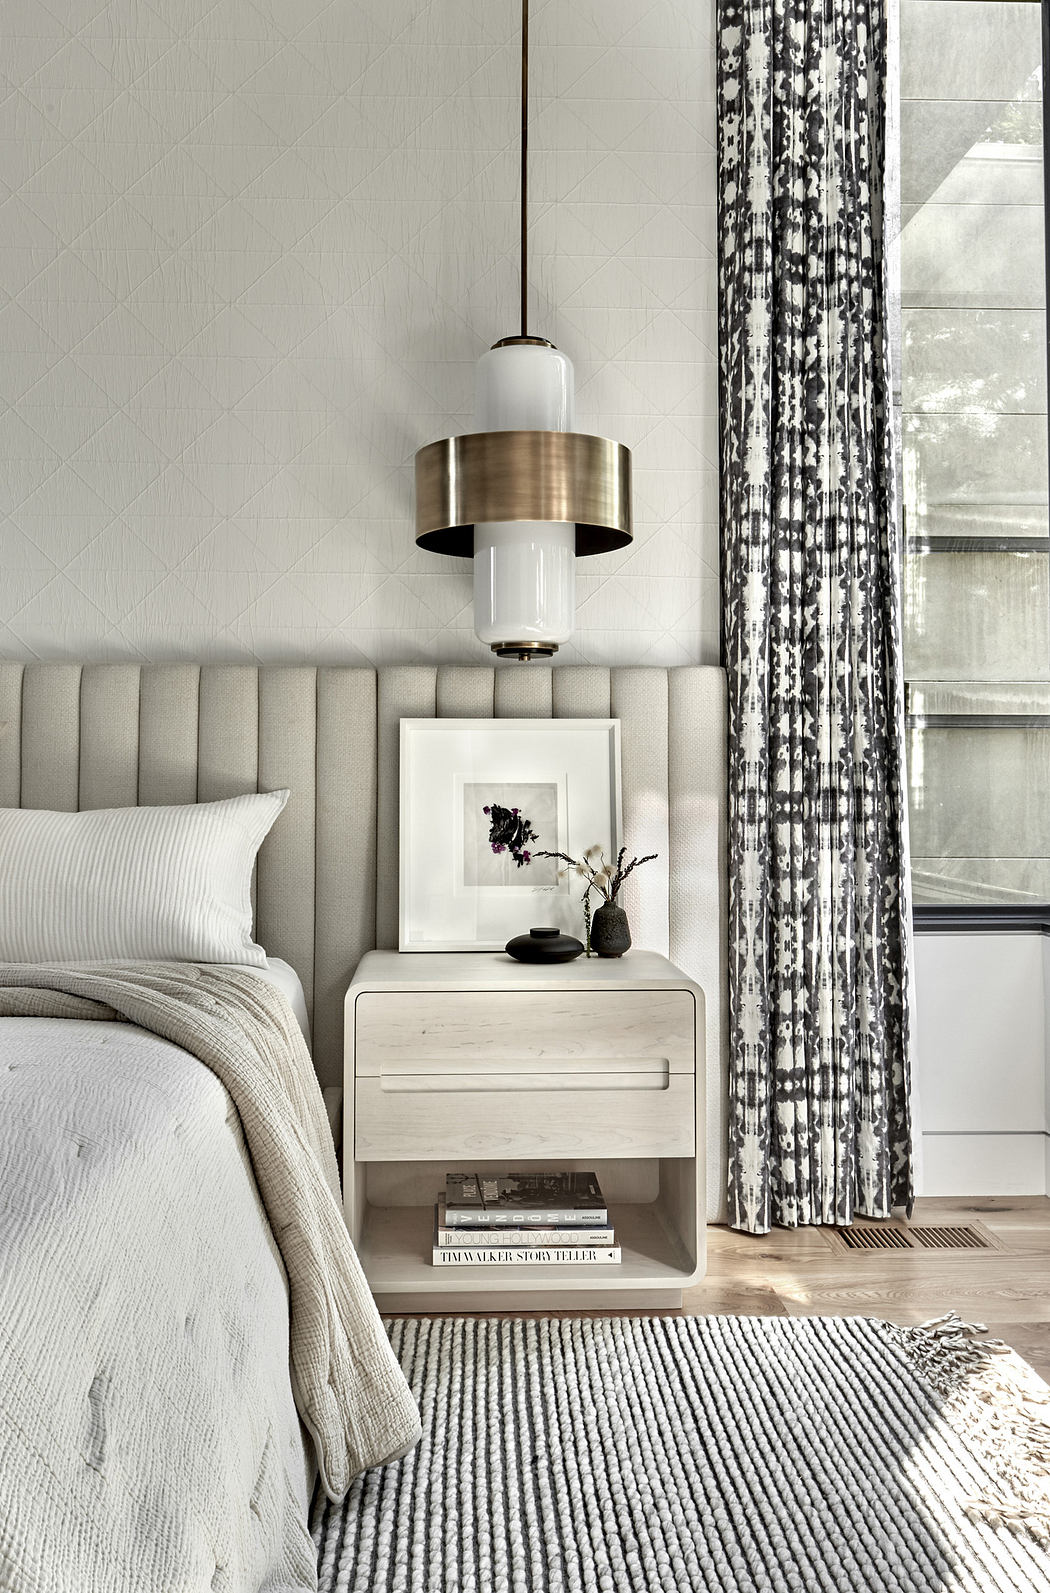 Modern bedroom corner with elegant bedside table, pendant lamp, and window with curtains.